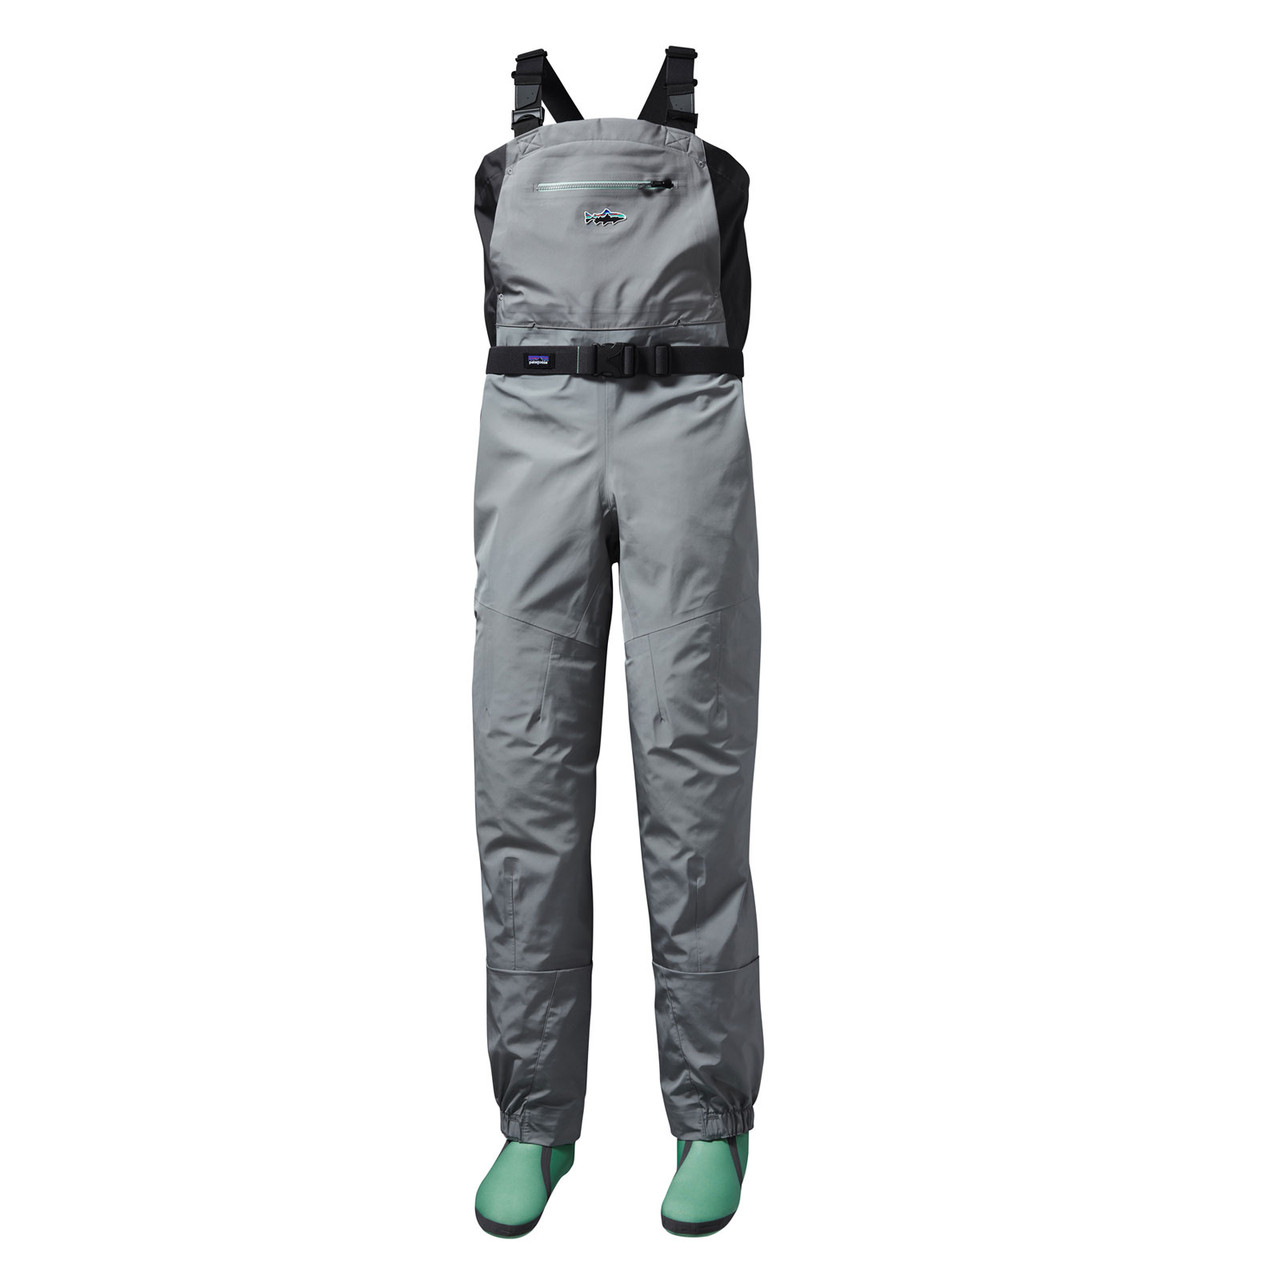 Women's Fly Fishing Waders by Patagonia